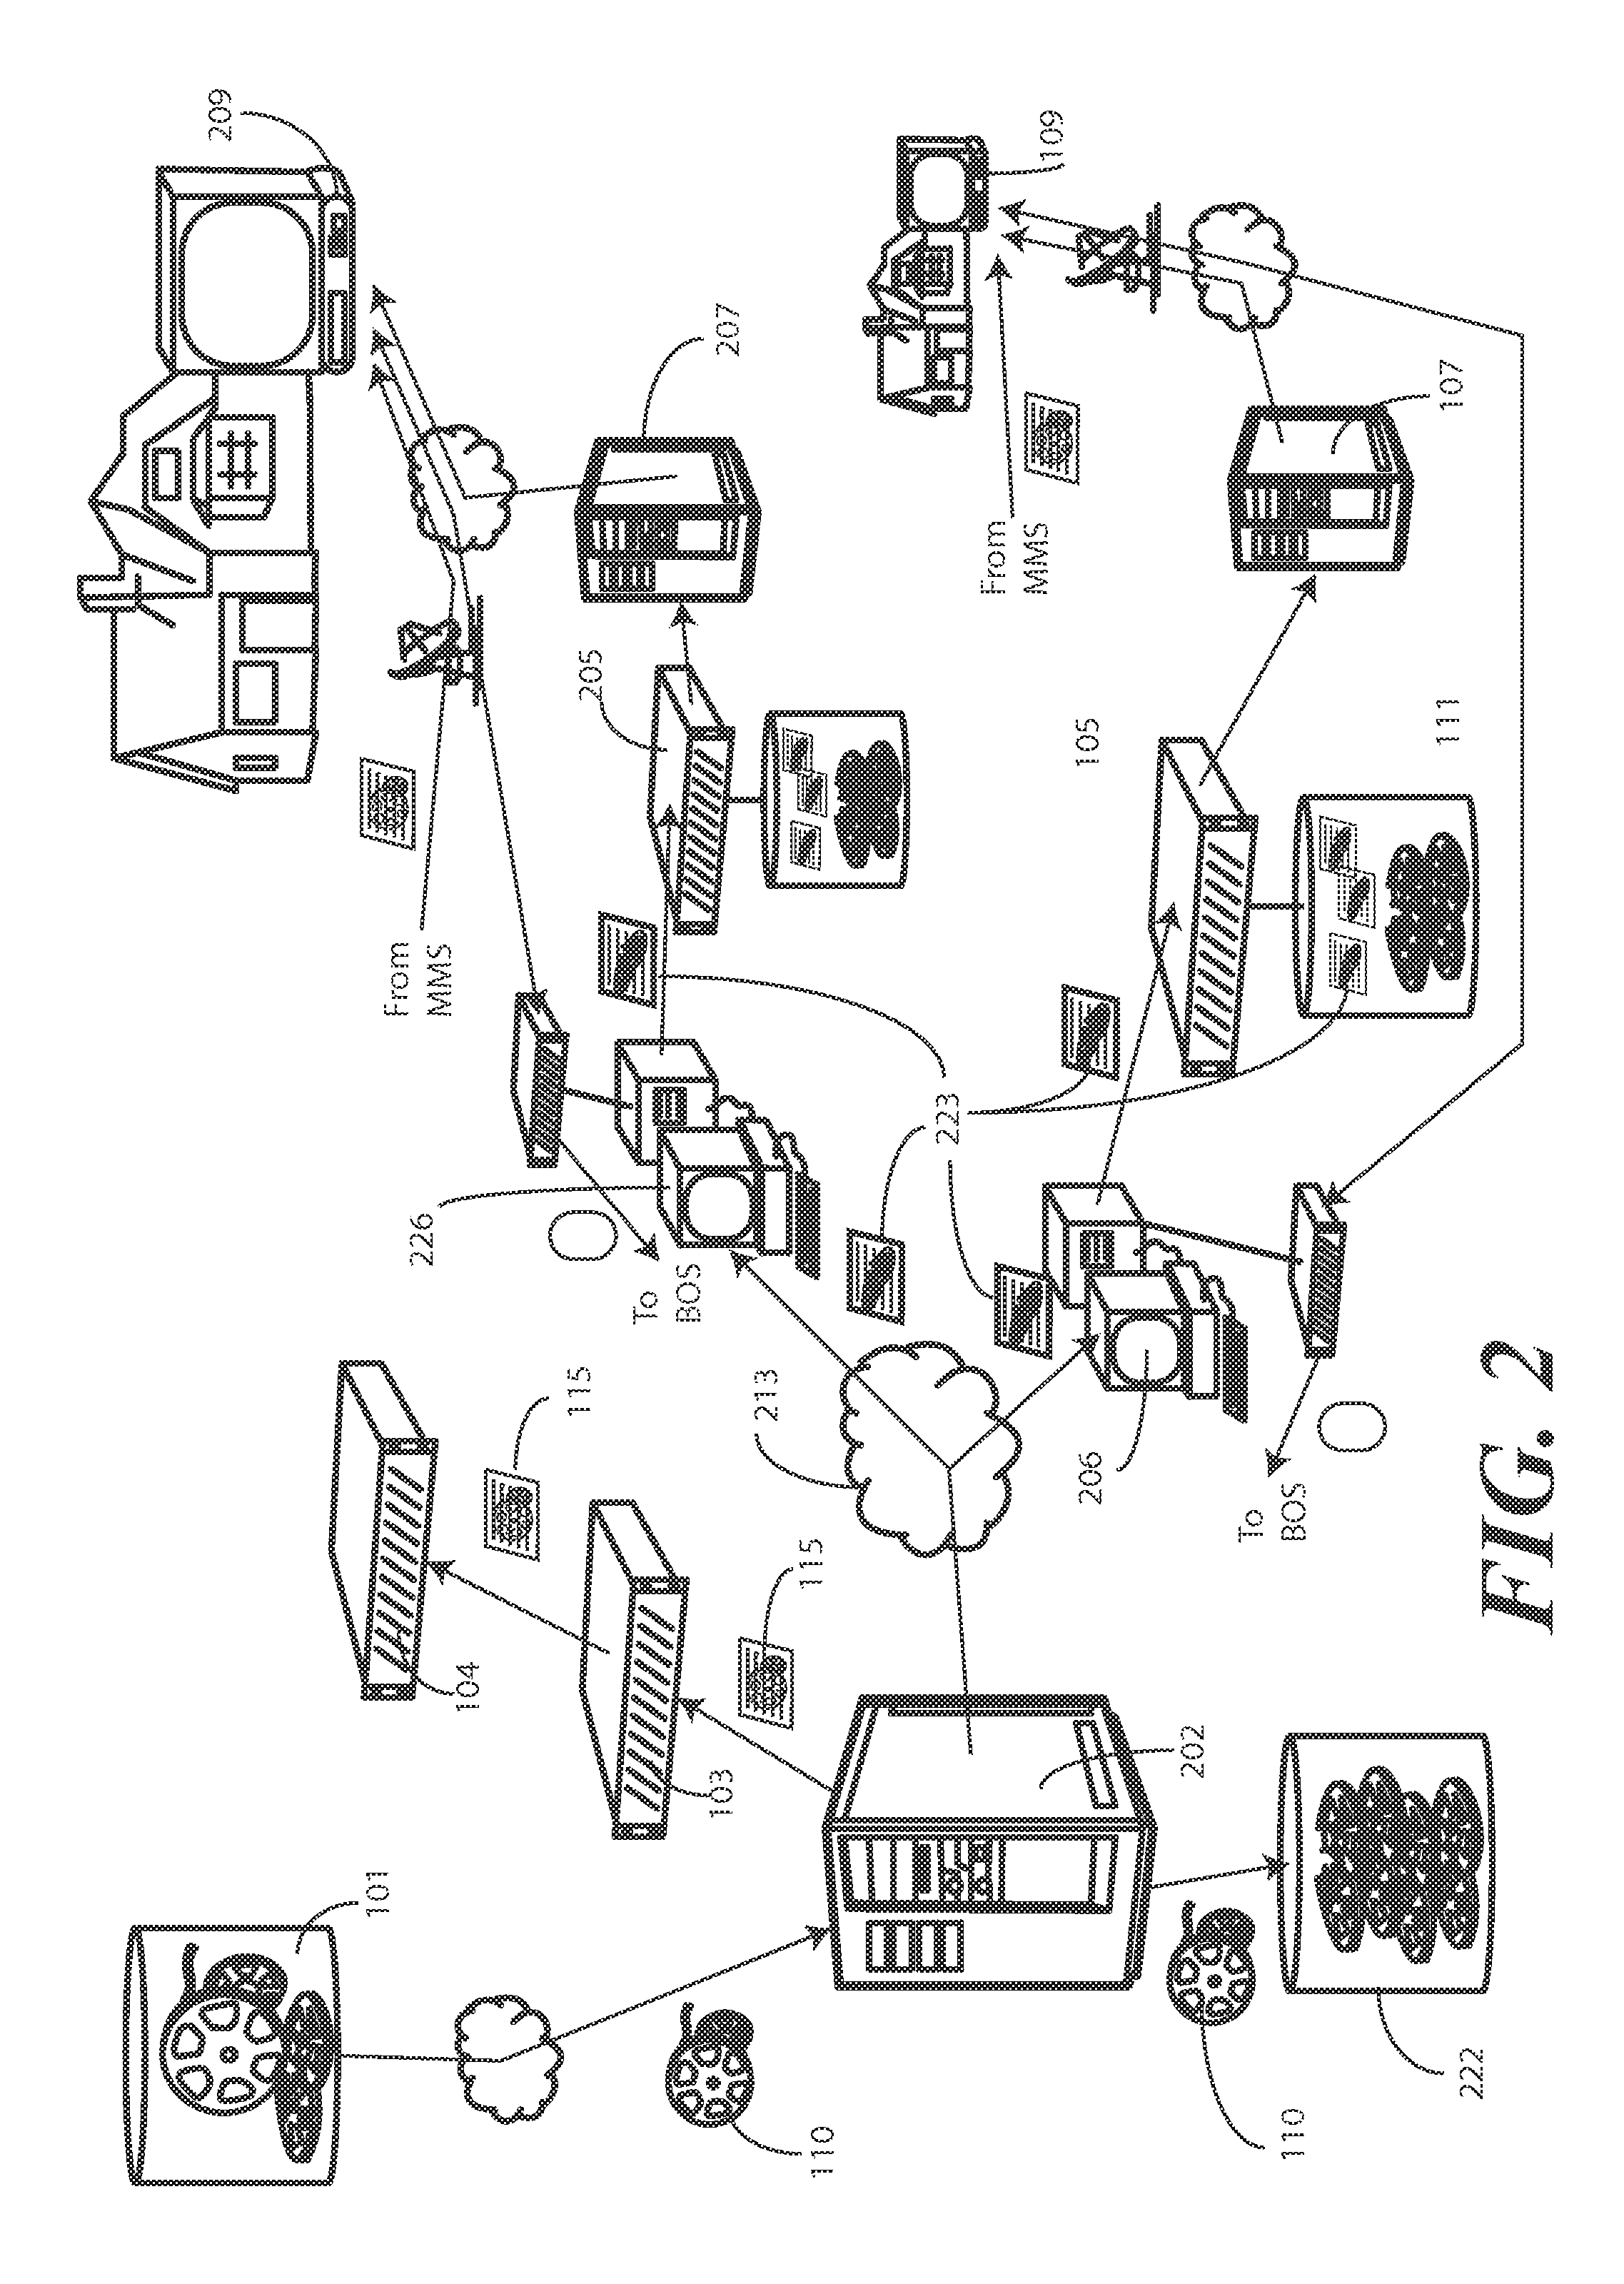 Demand-based edge caching video content system and method